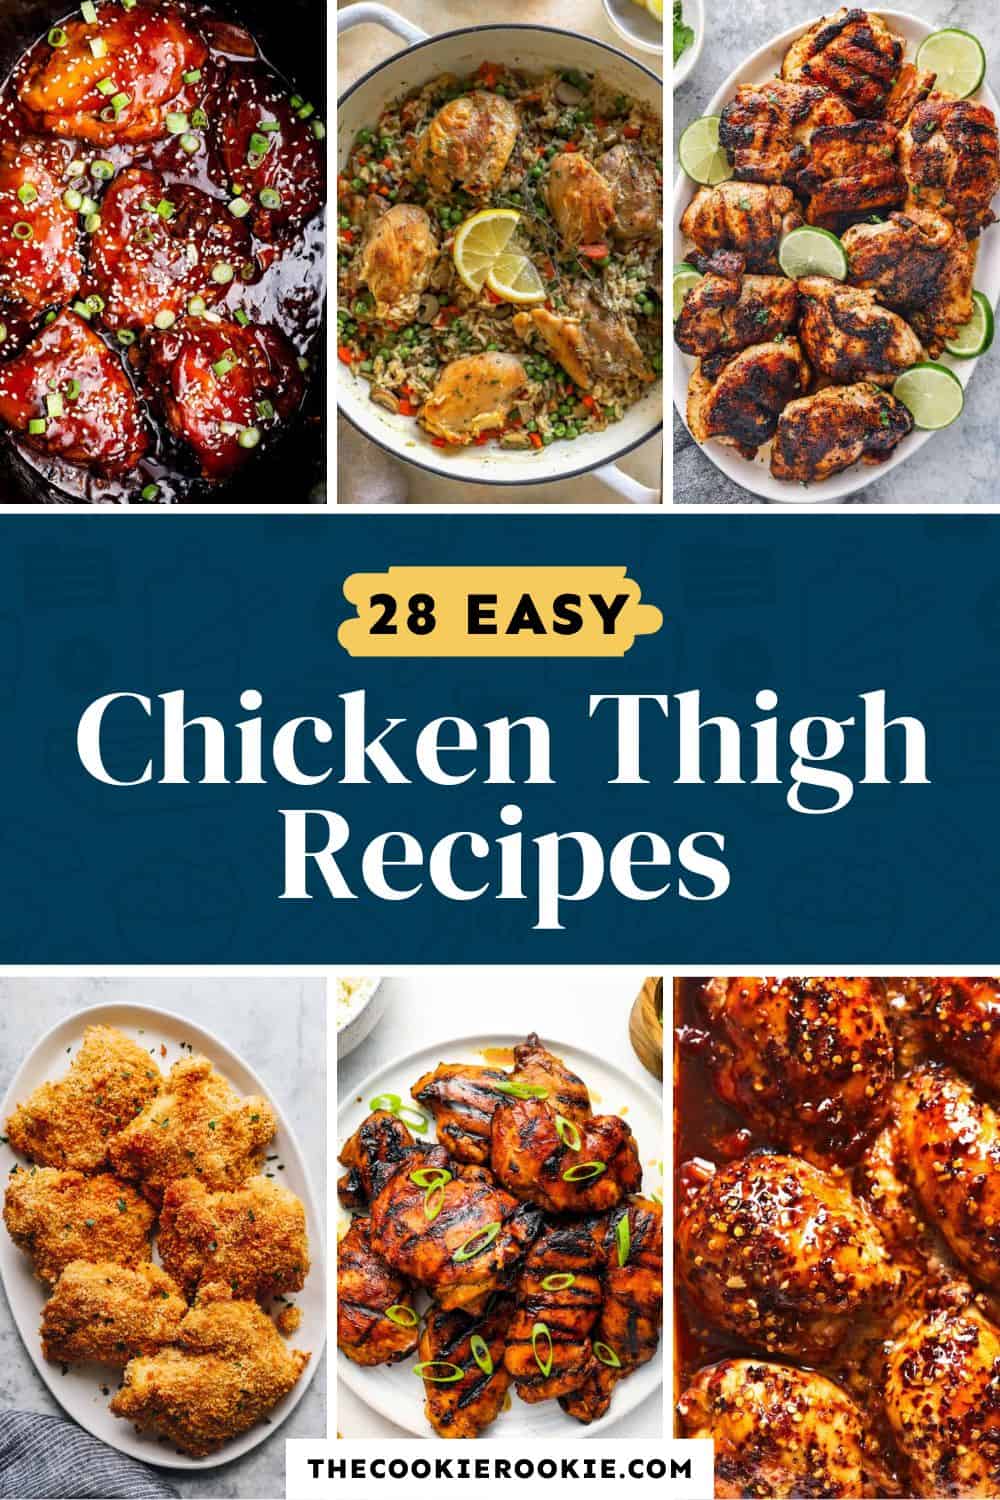 28 Chicken Thigh Recipes - The Cookie Rookie®